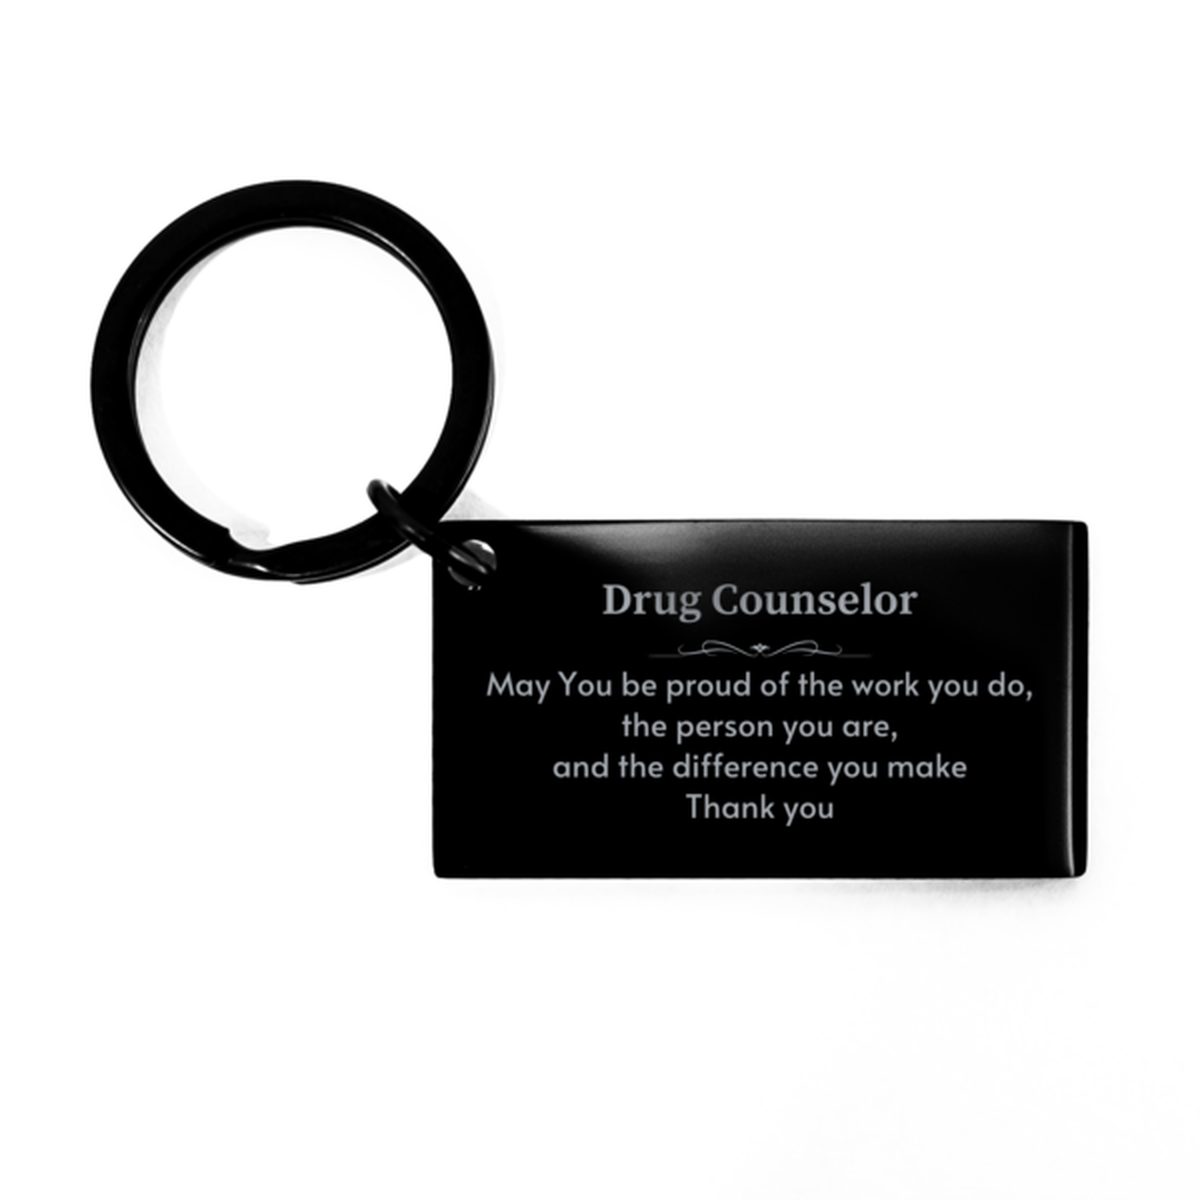 Heartwarming Keychain Retirement Coworkers Gifts for Drug Counselor, Inspector May You be proud of the work you do, the person you are Gifts for Boss Men Women Friends